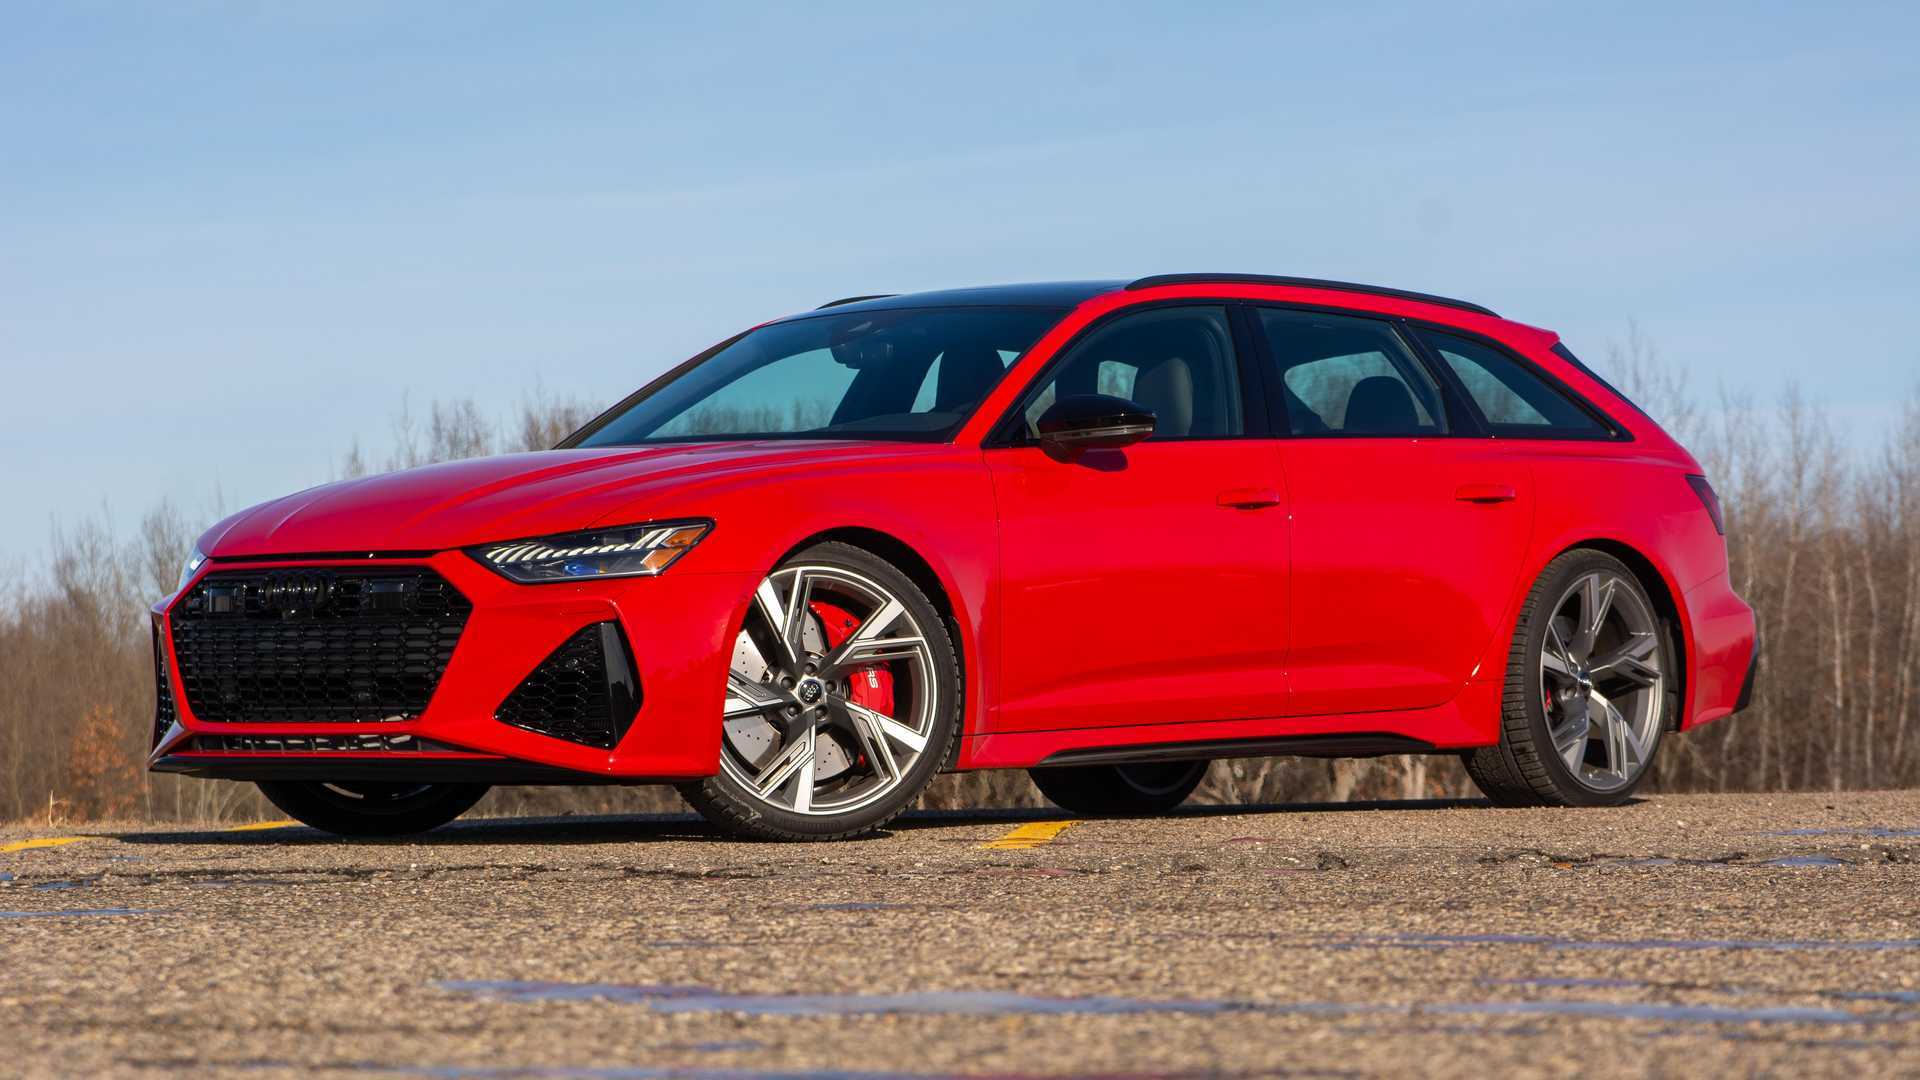 2021 Audi RS6 Avant Review: Everything You Expected